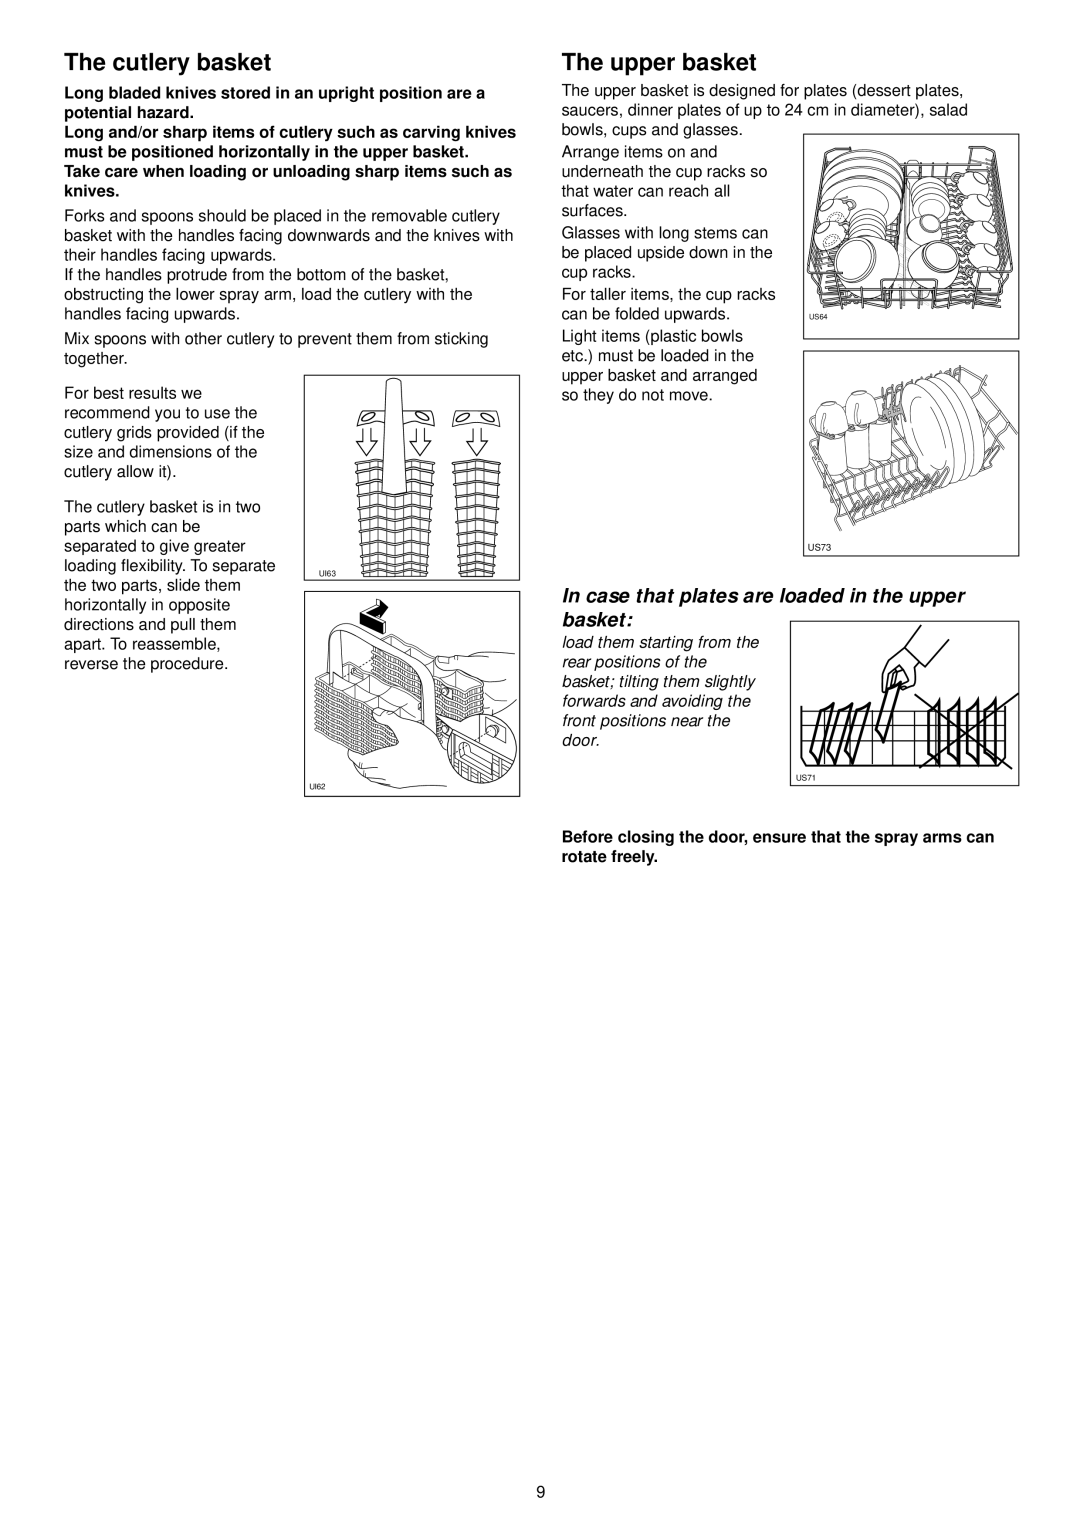 Zanussi ZDT 6053 manual The cutlery basket, The upper basket, In case that plates are loaded in the upper basket 